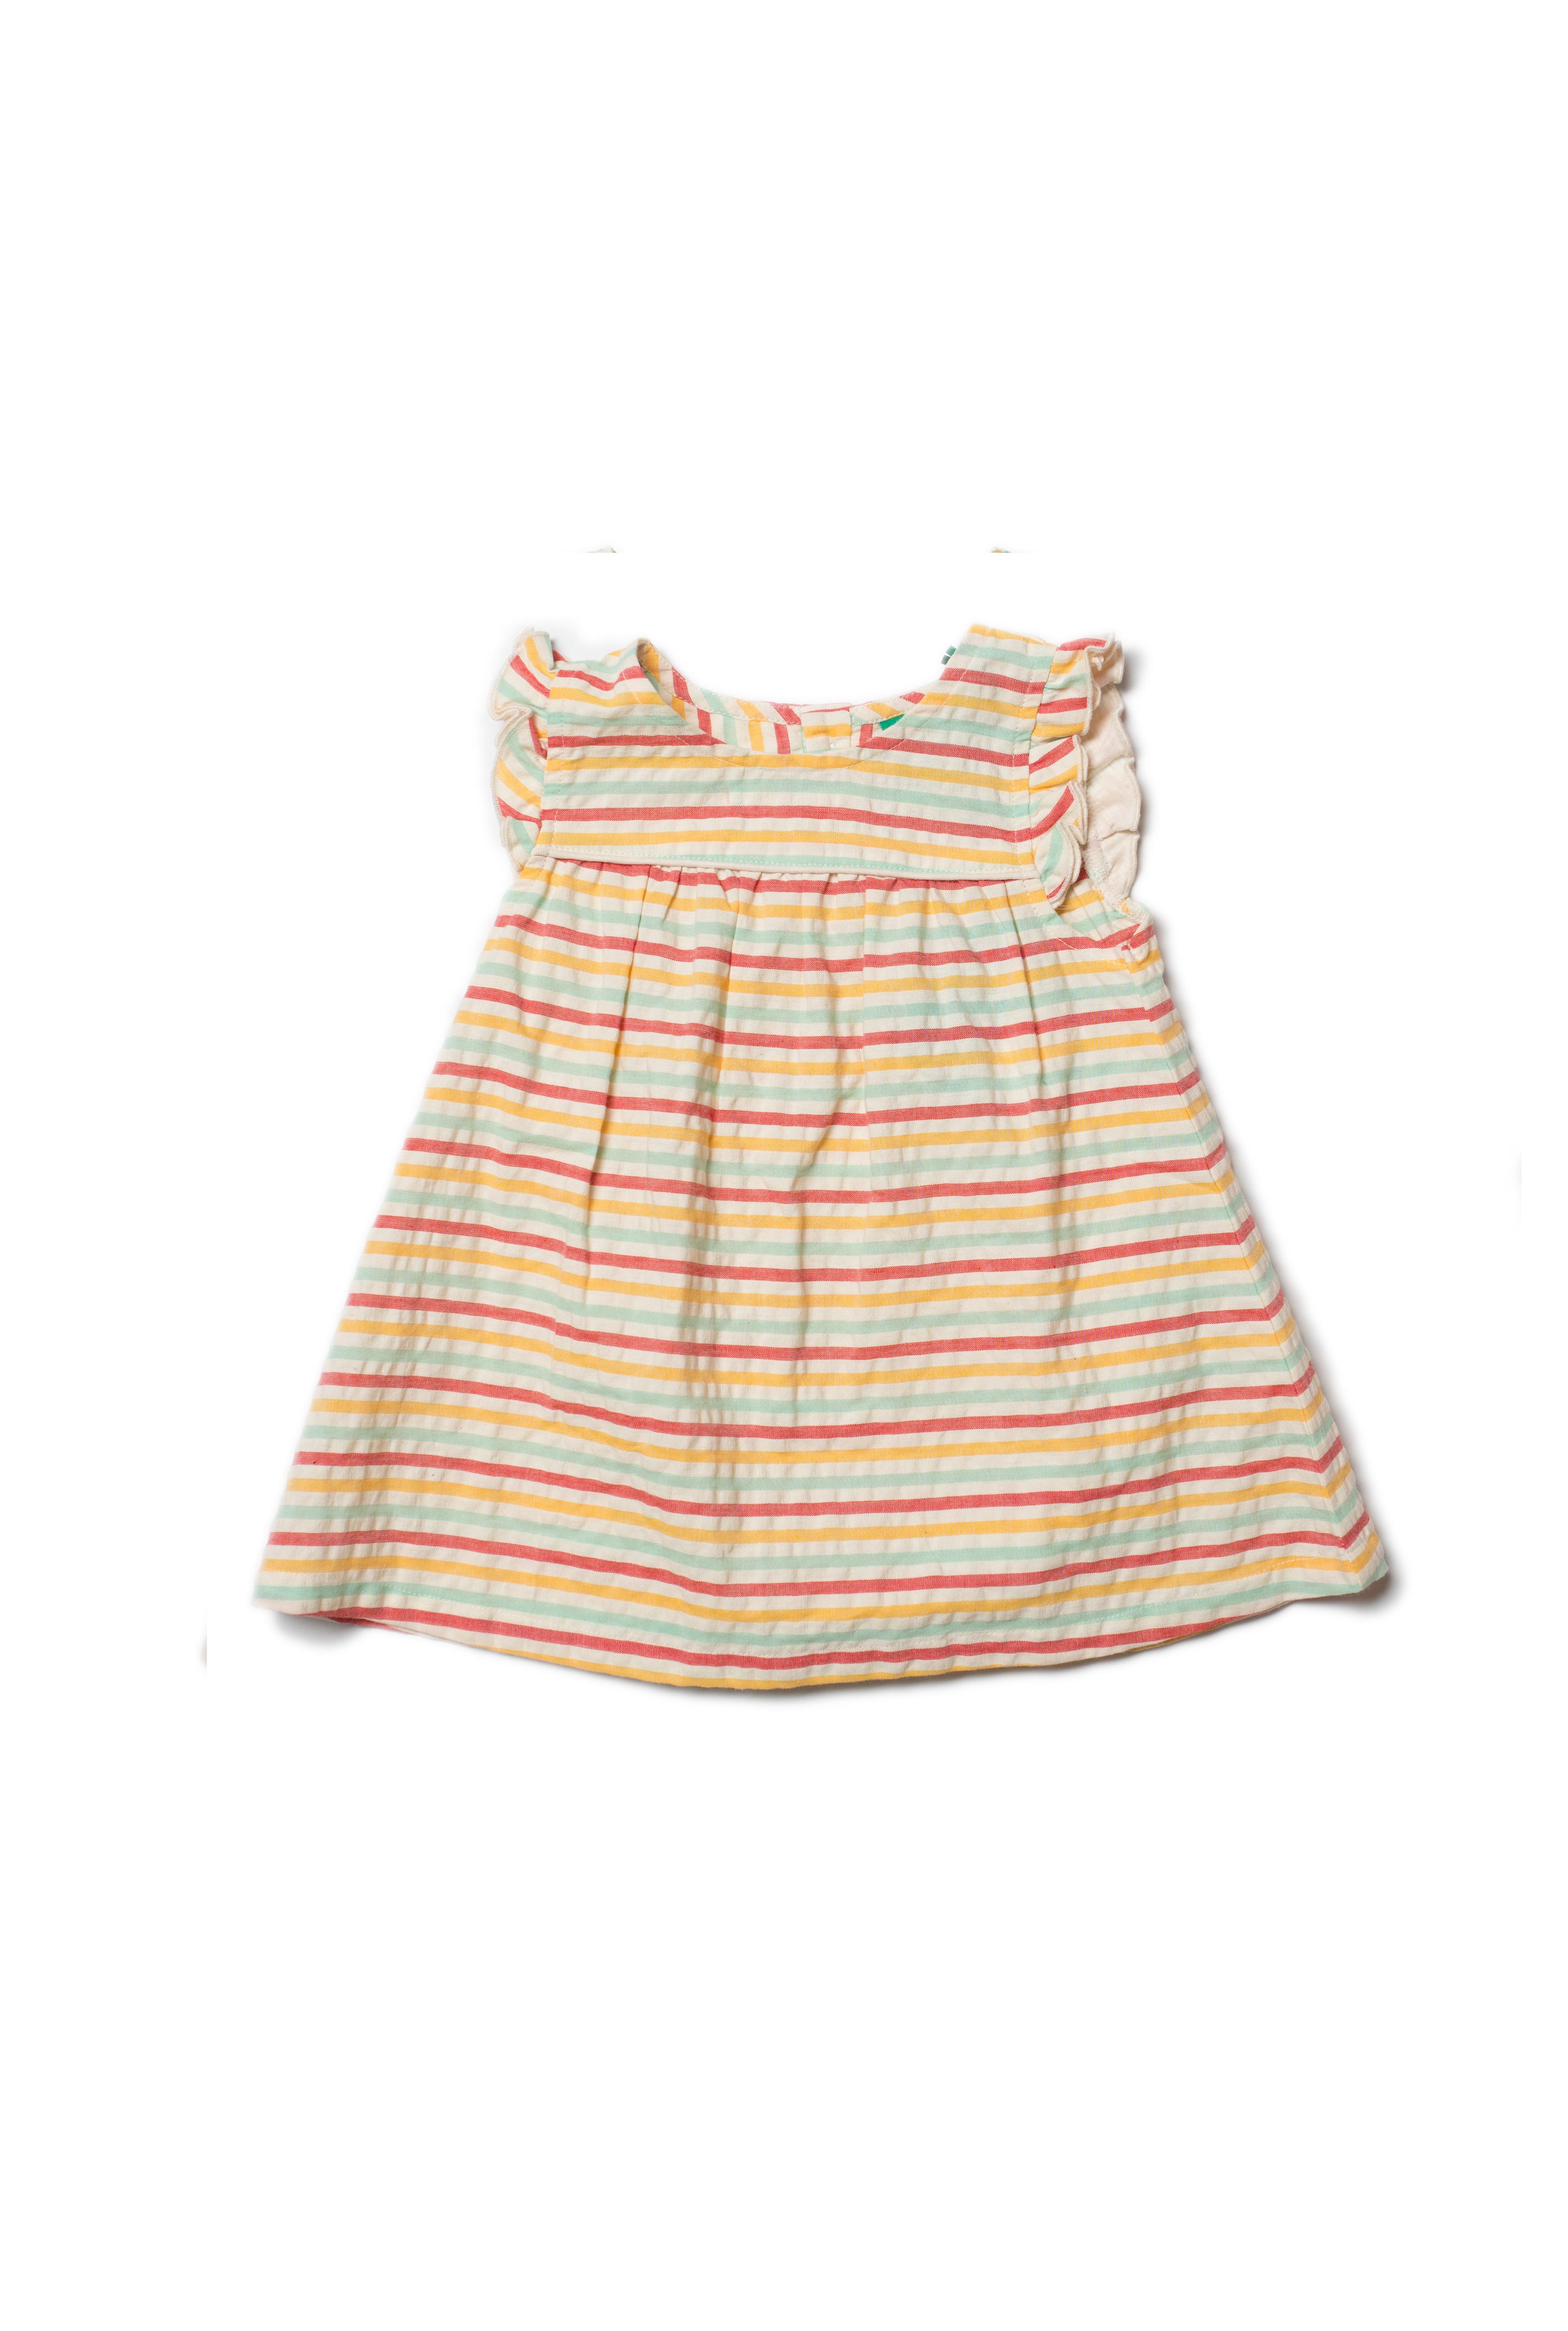 Product image of airy cotton dress in sunset colour stripes